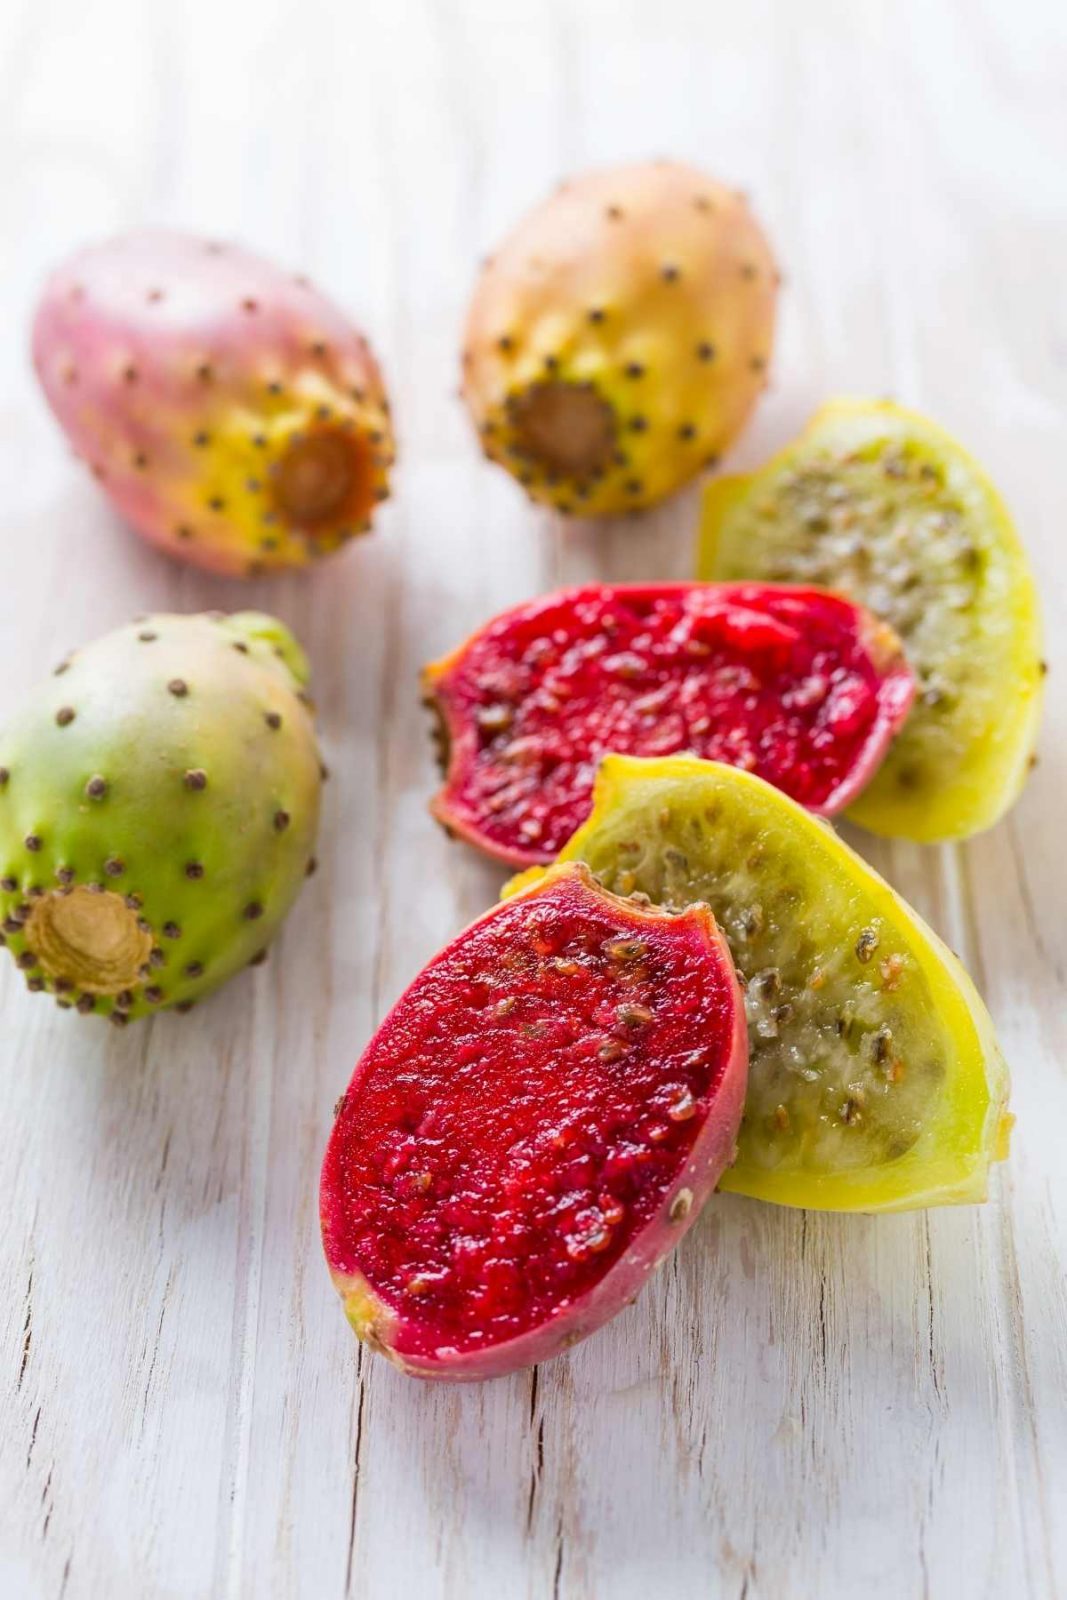 Are you ready to learn about Tuna Fruit? It’s a pear-shaped, red fruit that’s incredibly delicious! You can enjoy this fruit on its own, or add it to smoothies, desserts, salads and more! Either way, this refreshing fruit won’t disappoint.